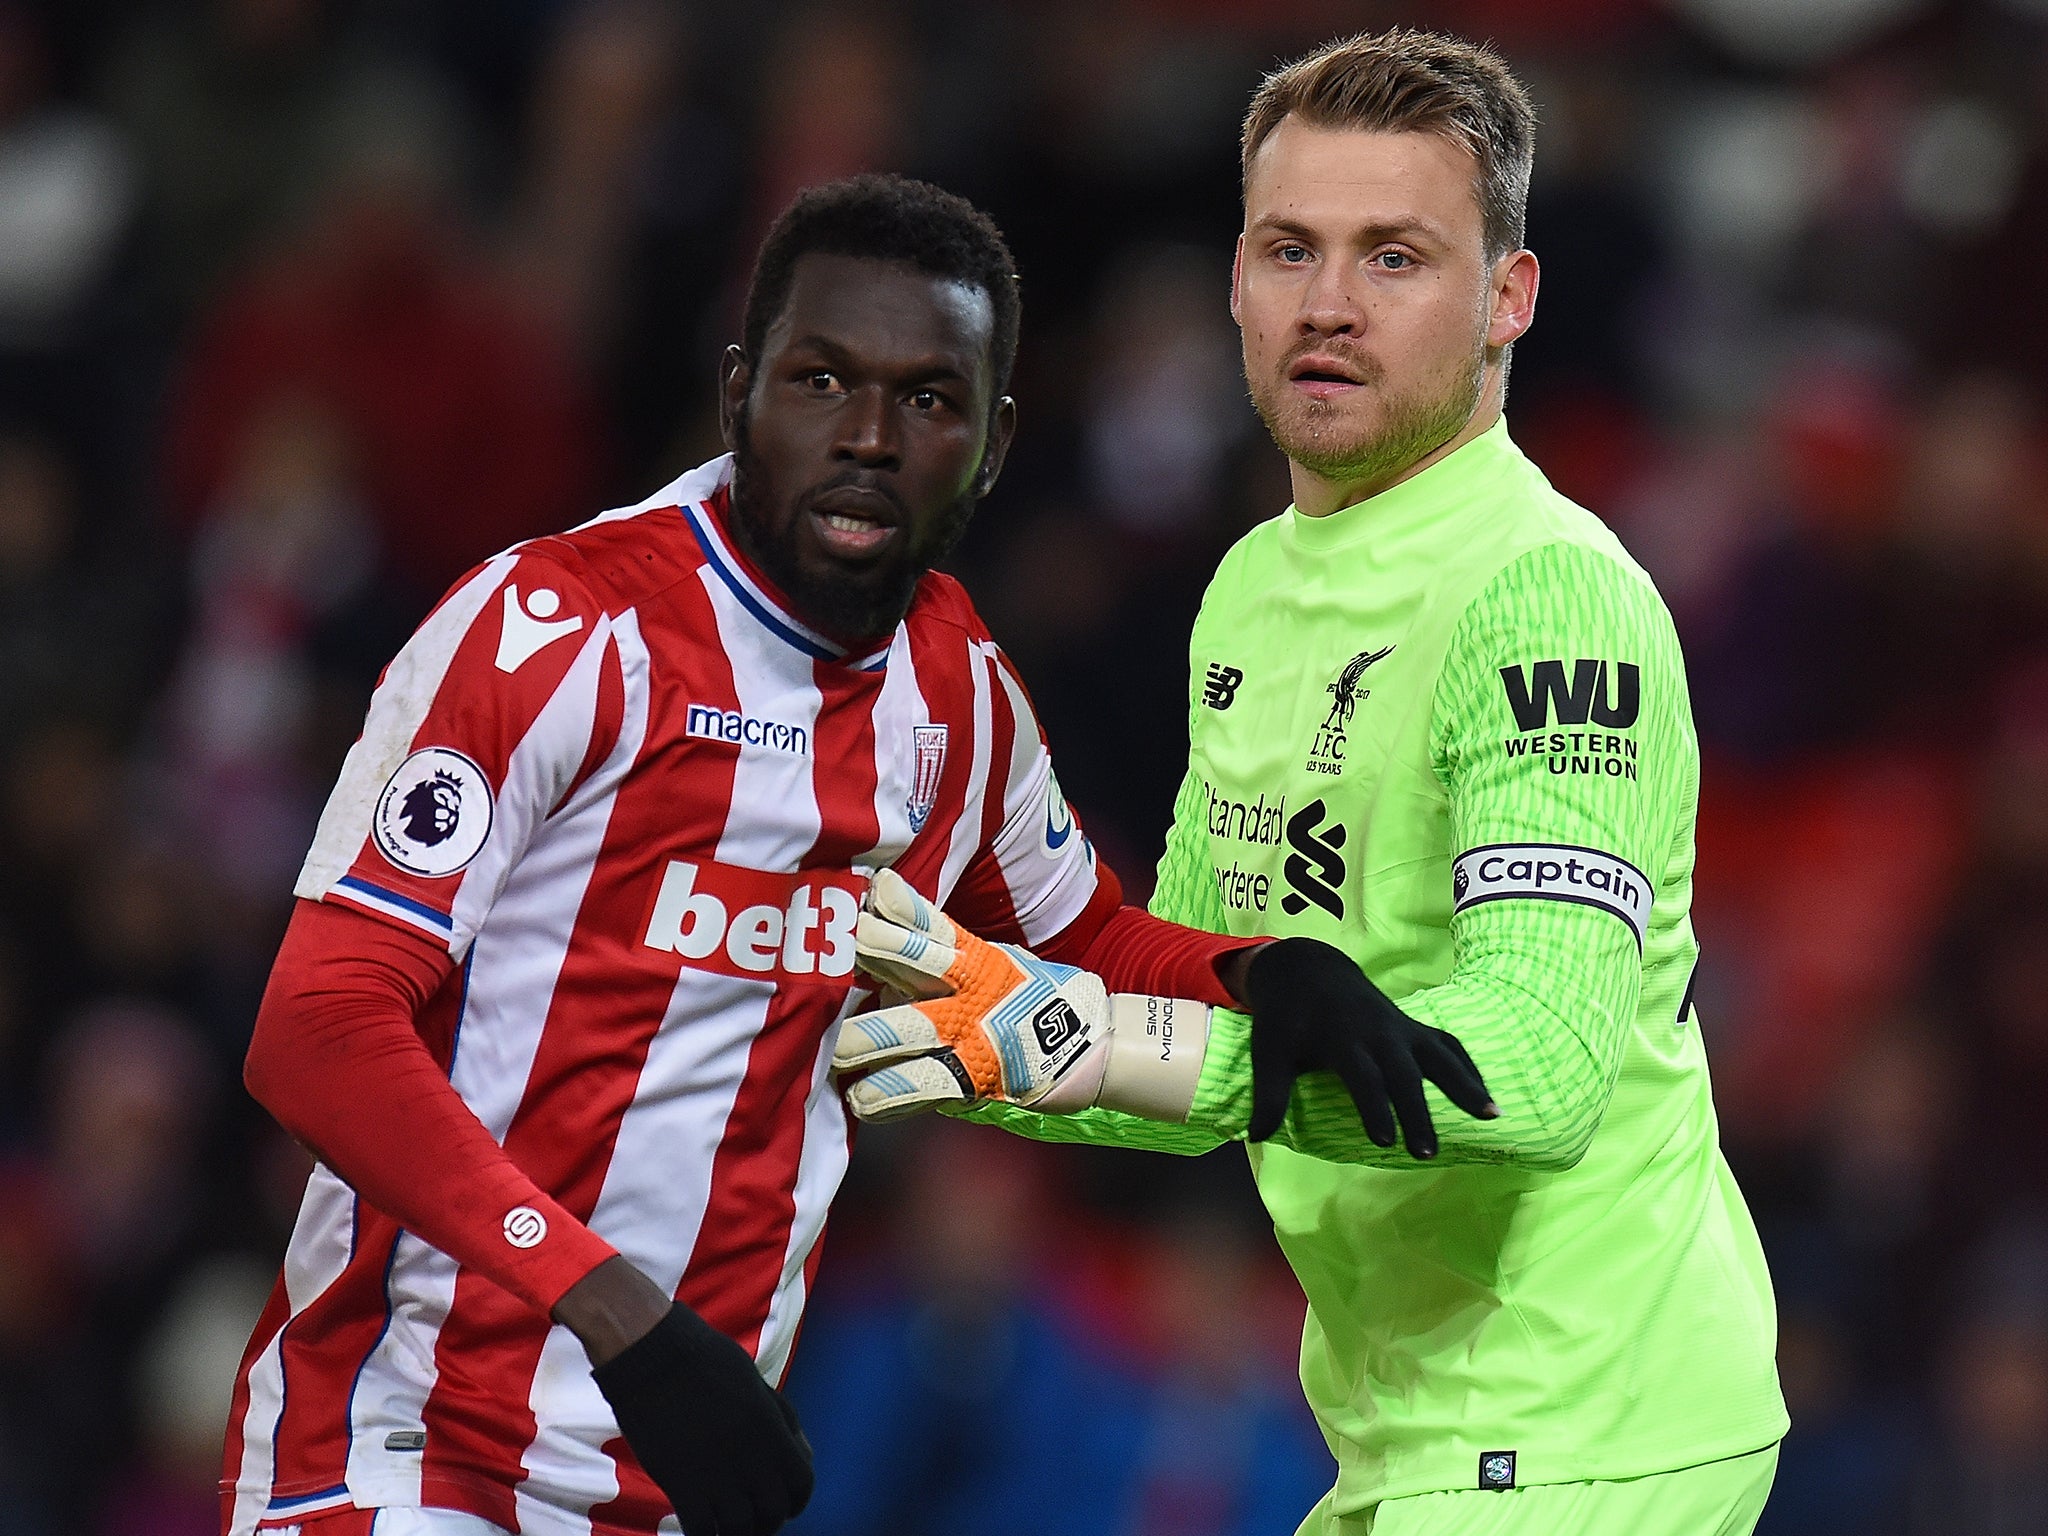 Mignolet brought down Diouf outside the area but only received a yellow card